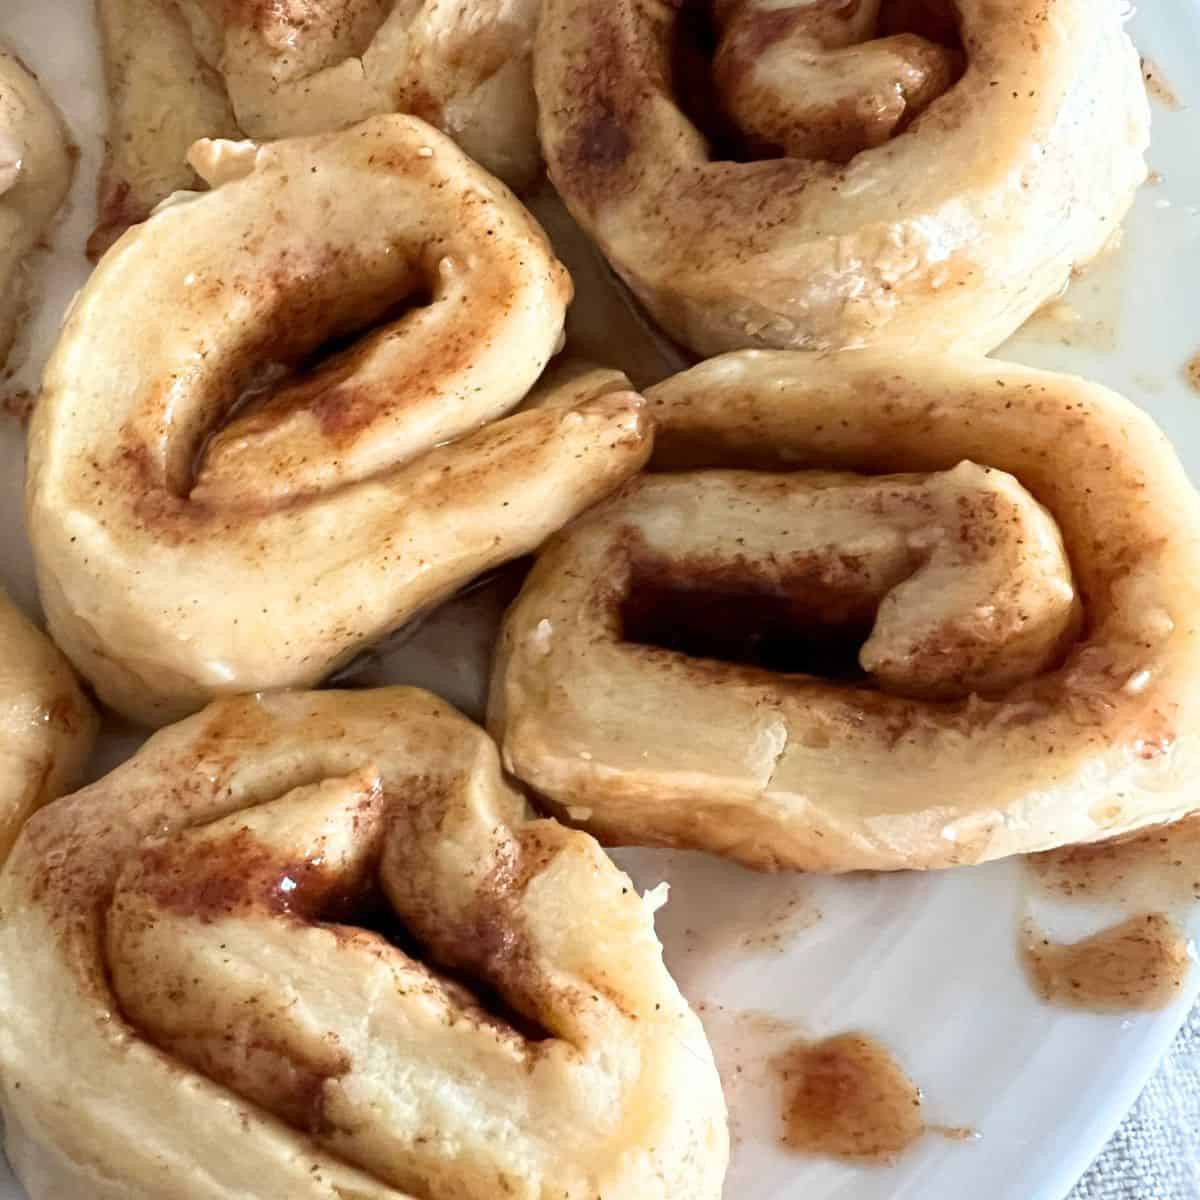 This cinnamon roll recipe is made with the famous 2 ingredient dough recipe is equal parts Greek Yogurt and Self Rising Flour